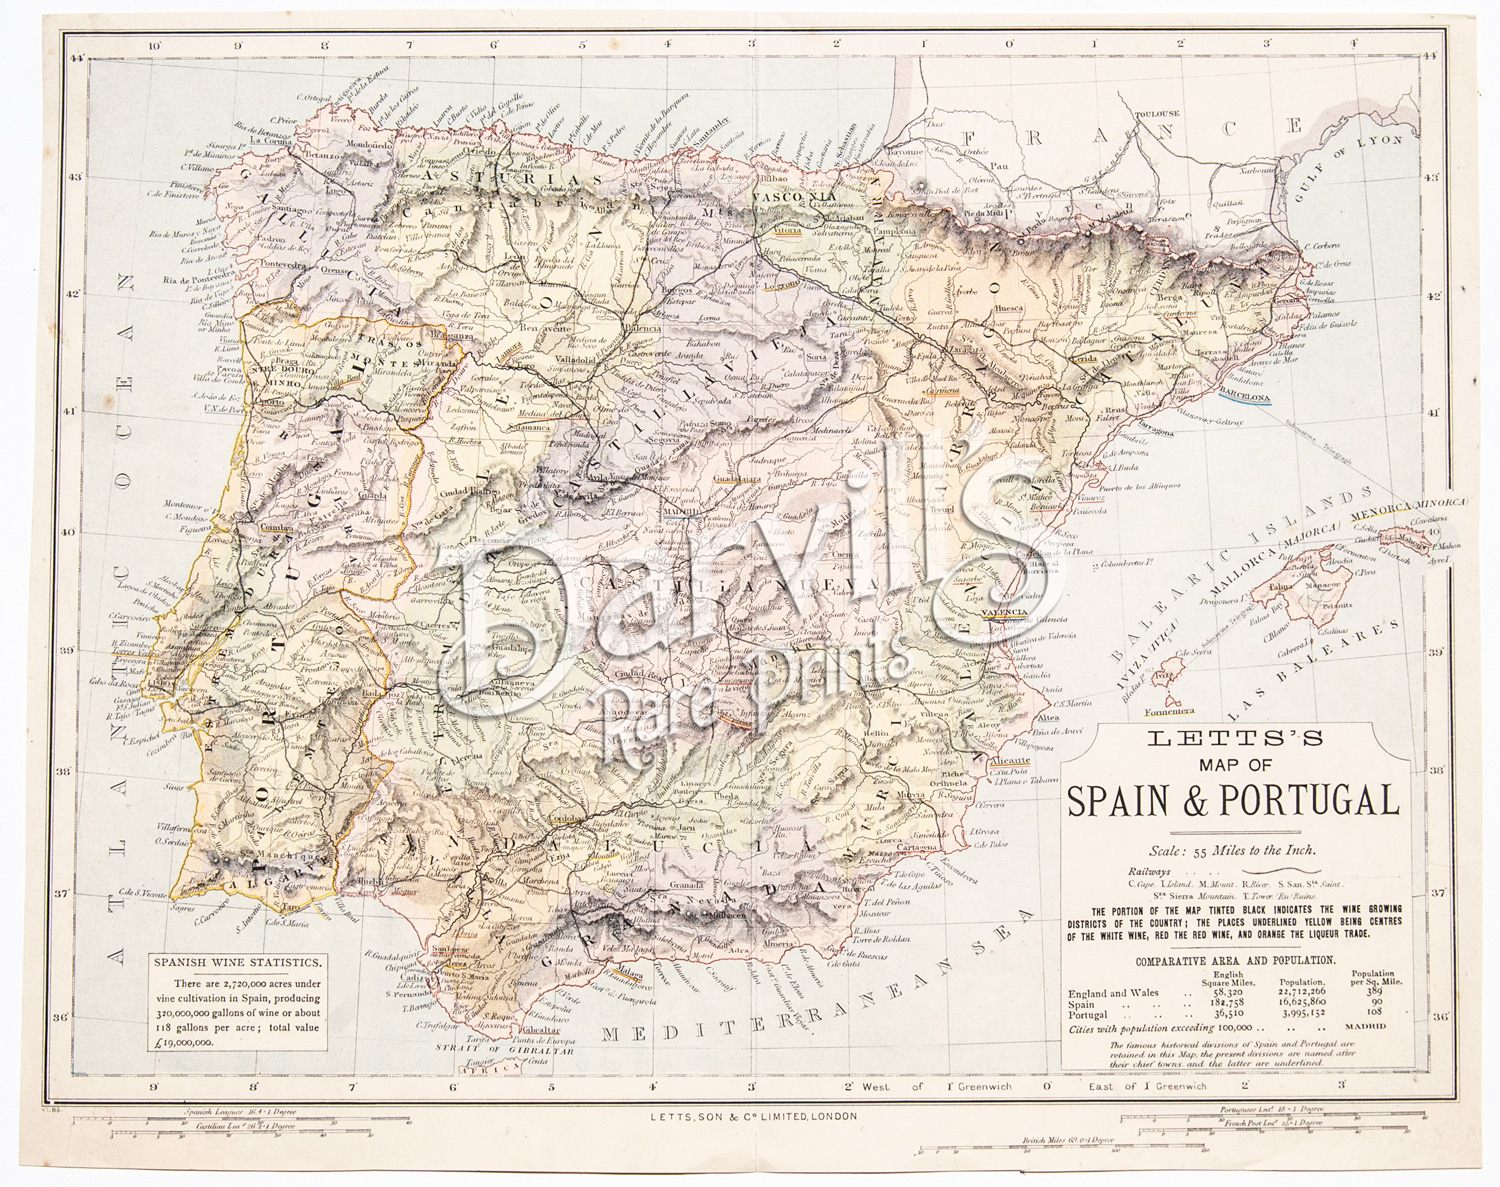 Spain and Portugal 1887